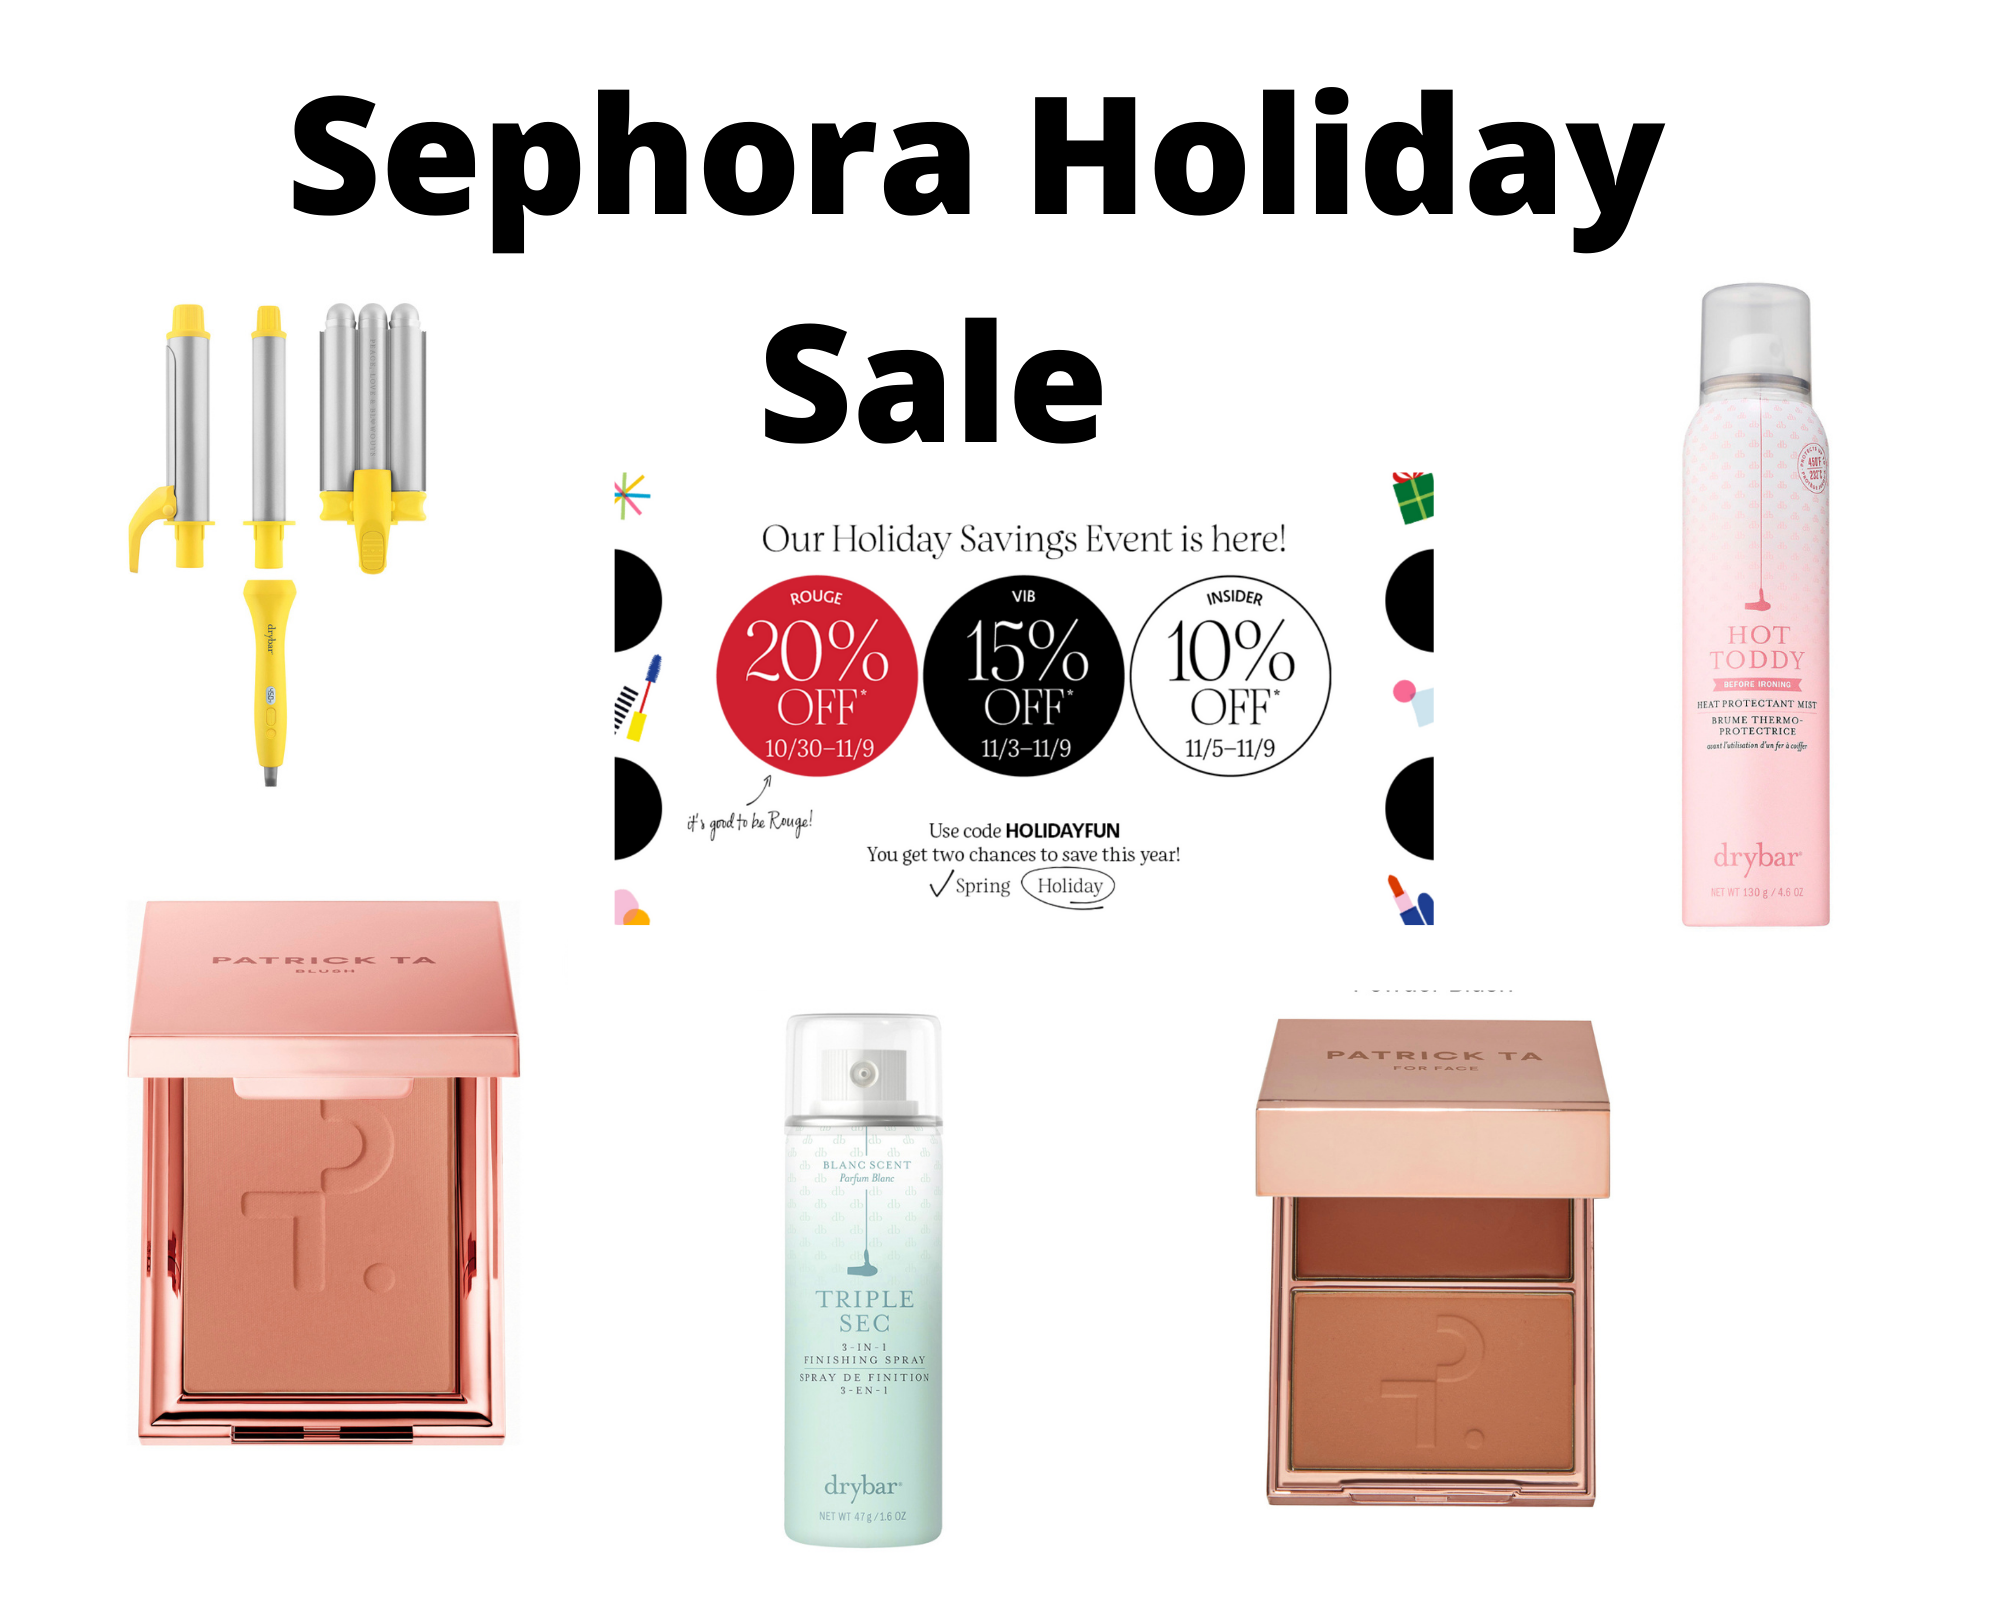 Sephora Holiday Sale Purchases